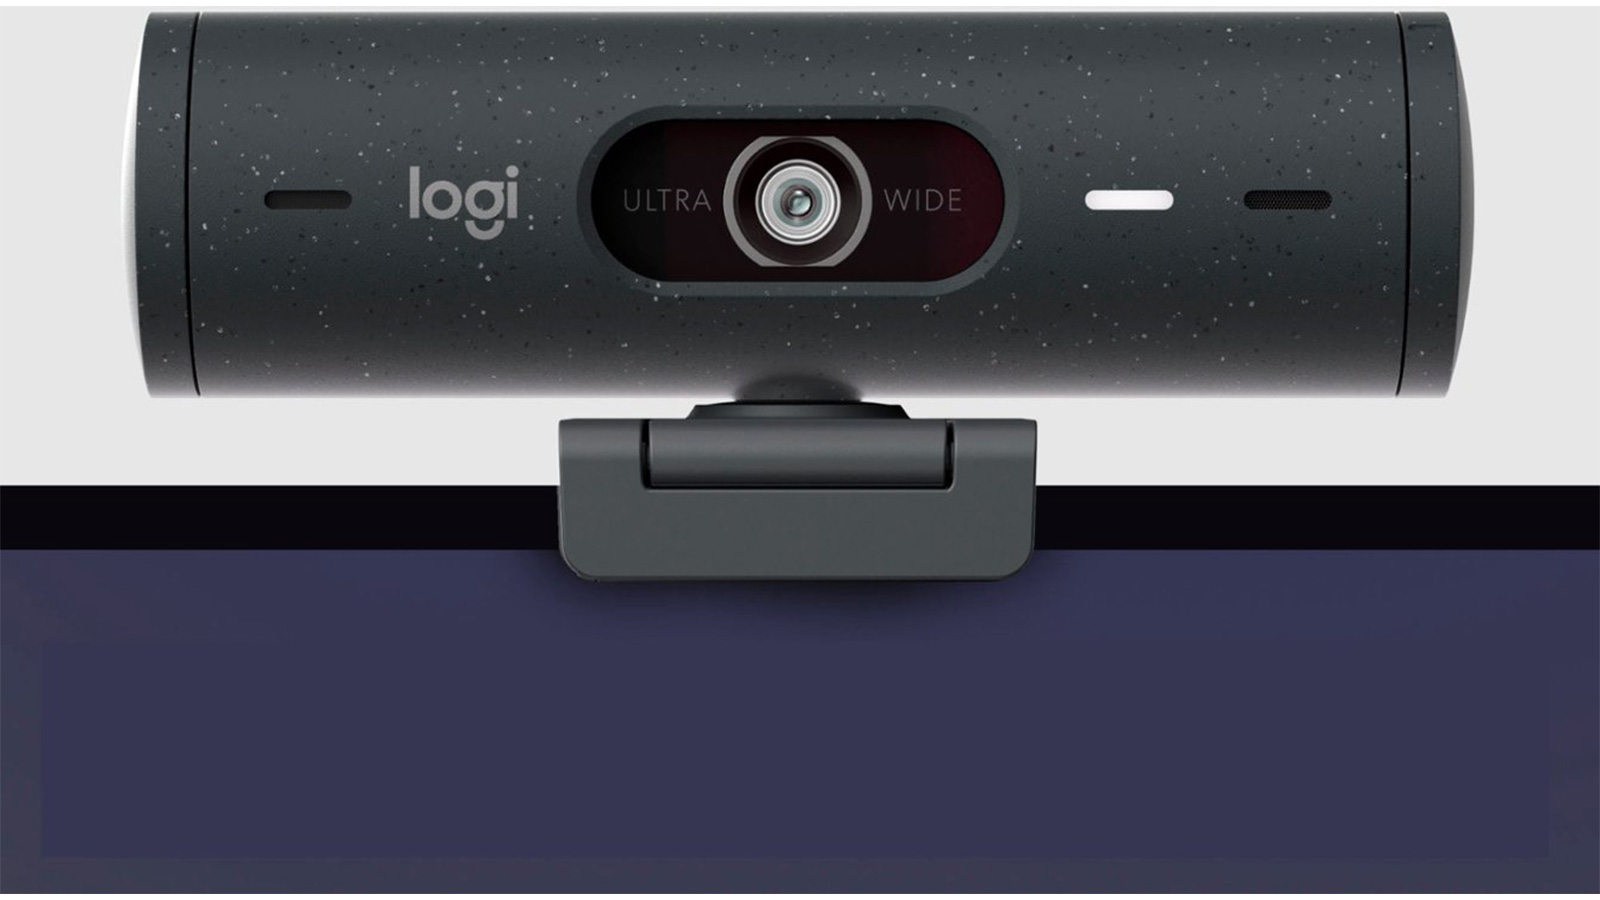 Save up to $30 on some of Logitech’s most popular webcams and keyboards at Best Buy